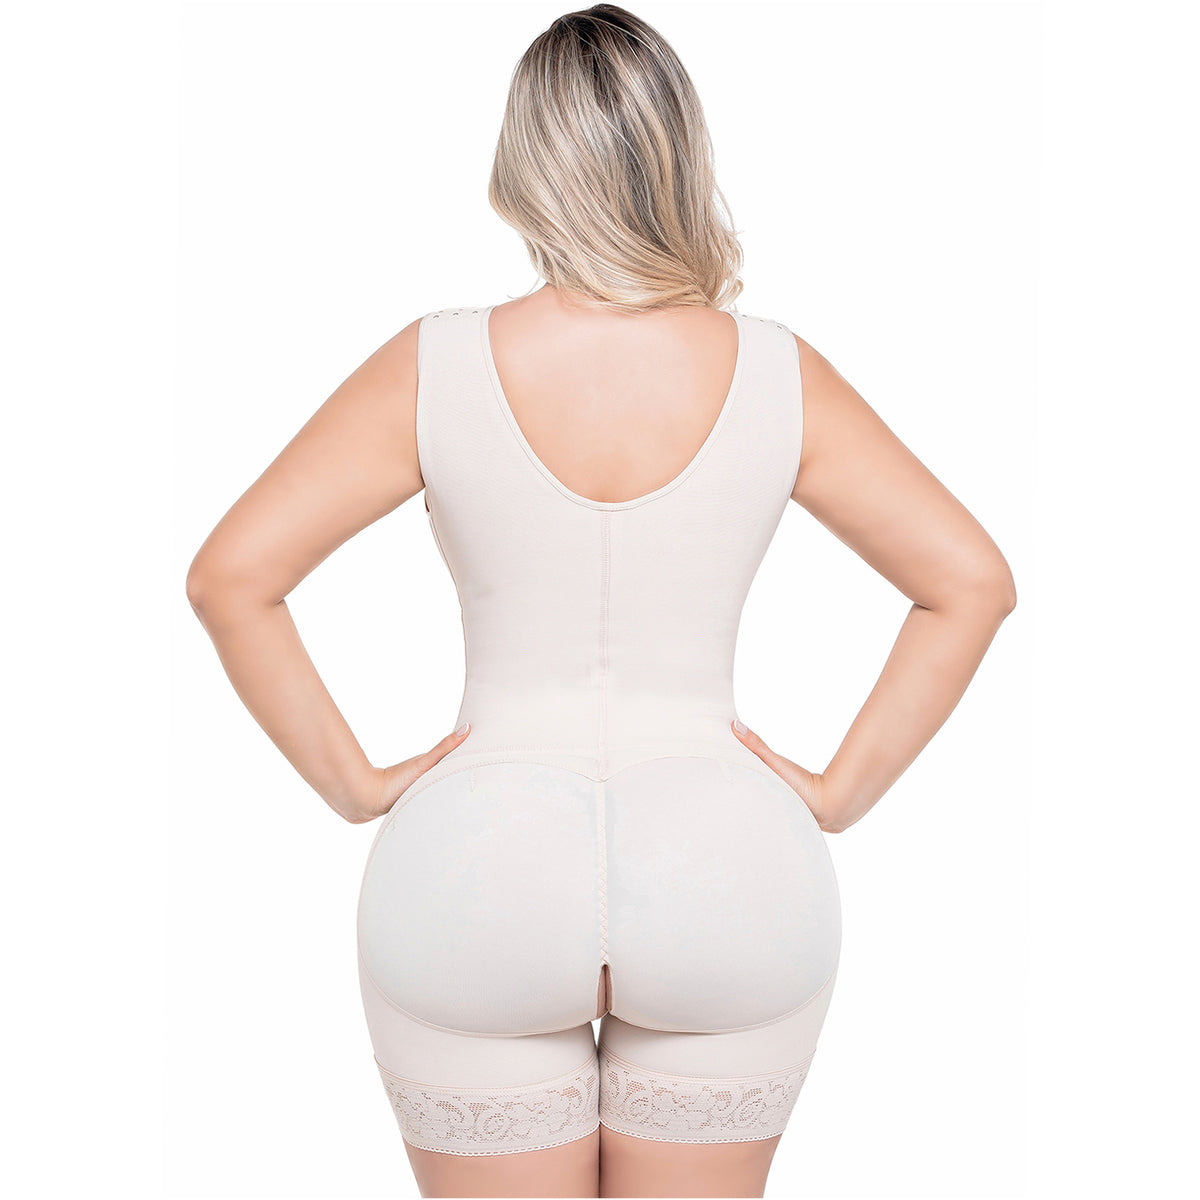 Sonryse Shapewear: 010 - Colombian Faja Knee Lenght with Built-in